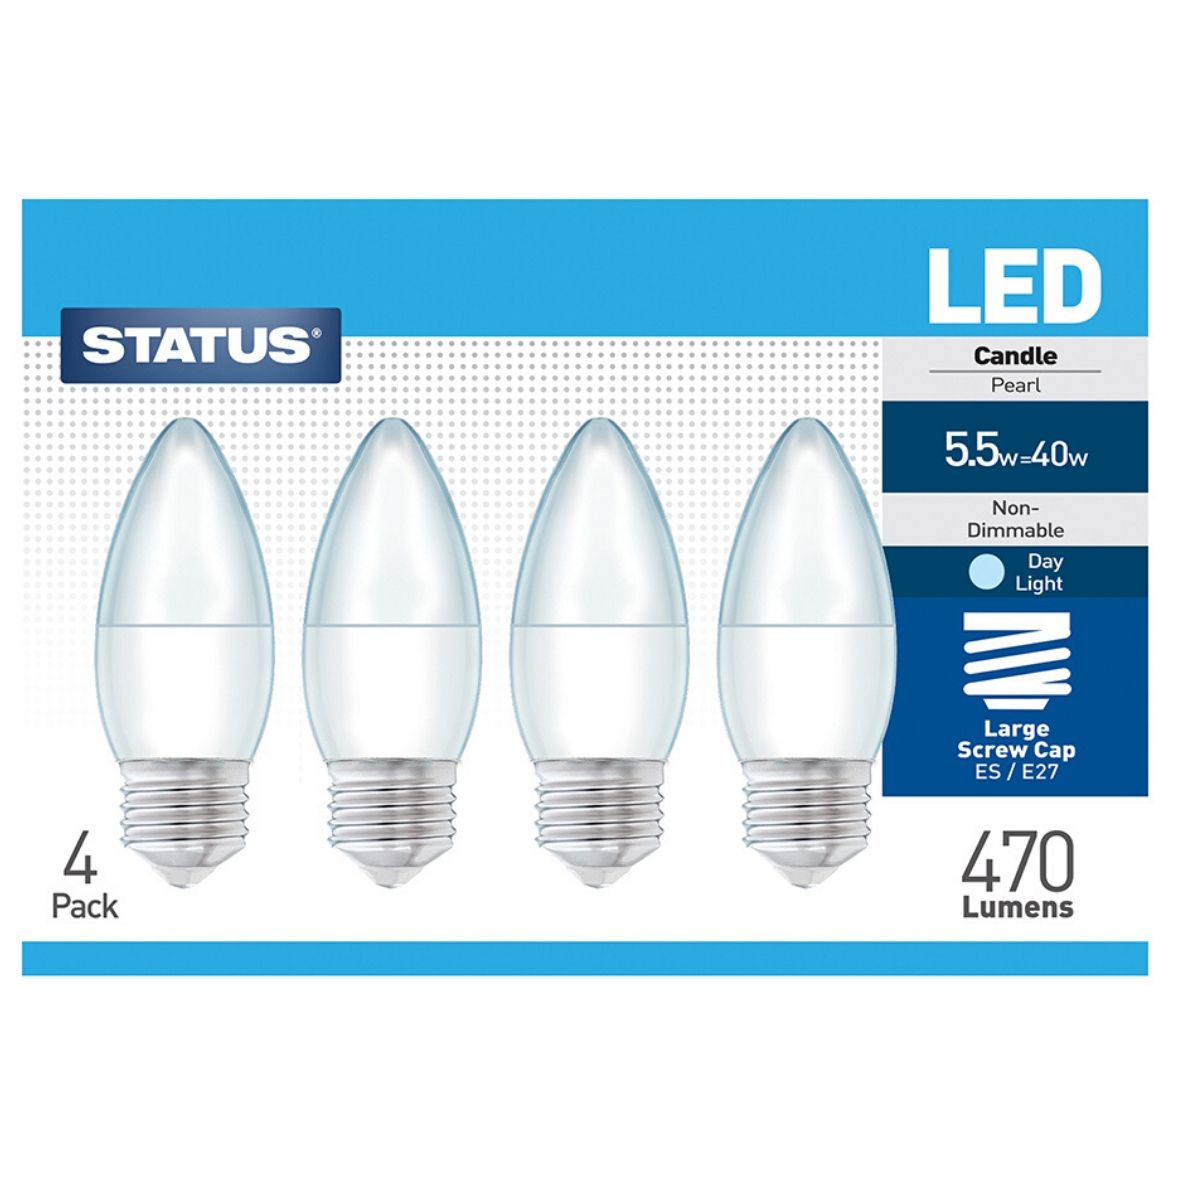 View 4 x 55w E27 Screw LED Candle Light Bulbs information